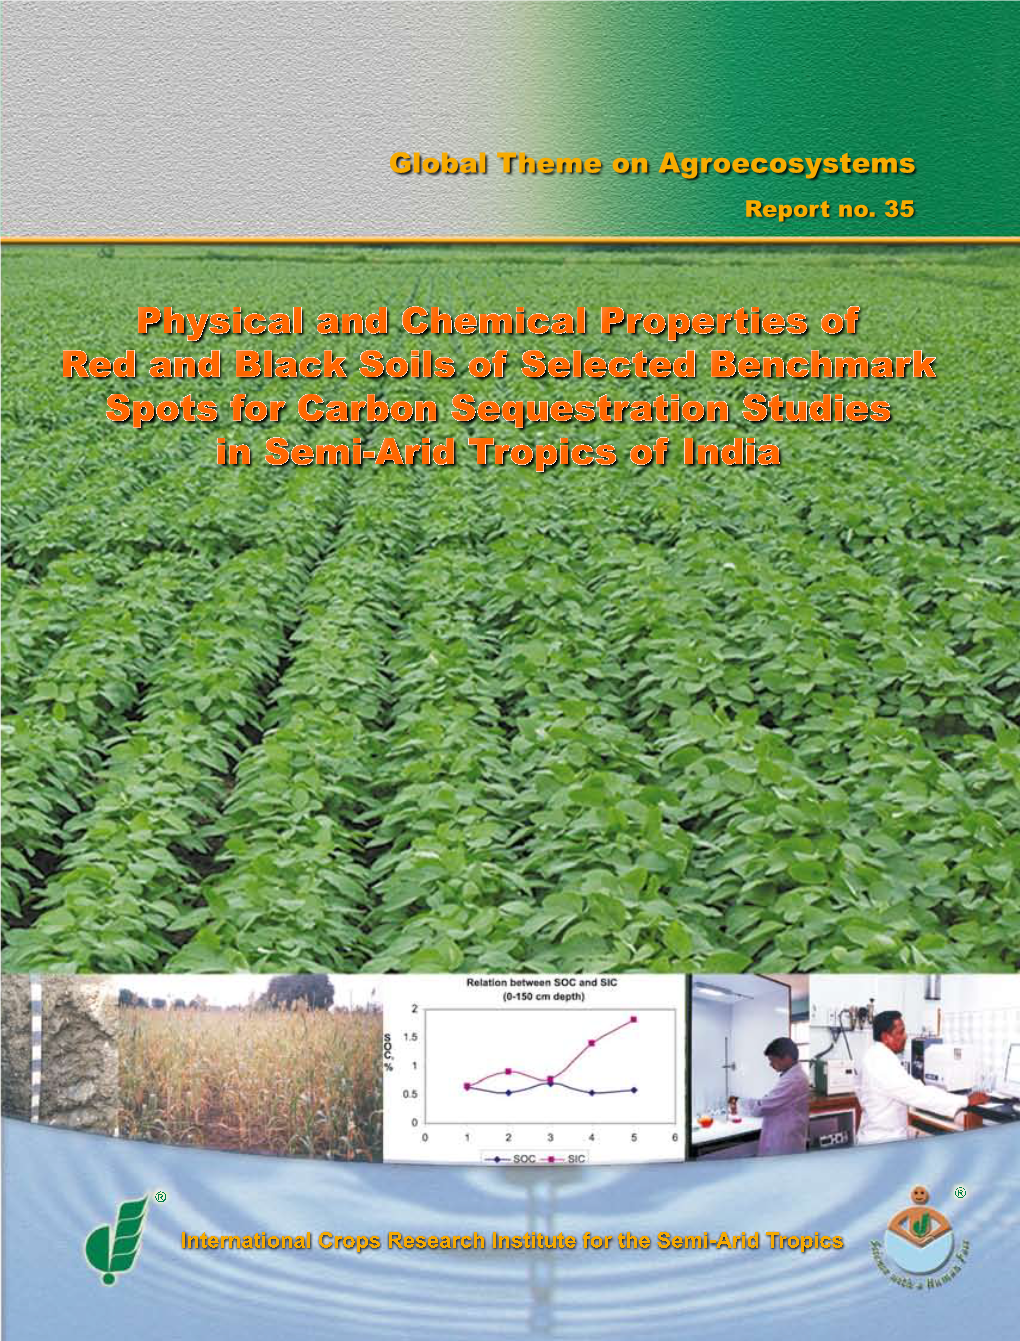 Physical and Chemical Properties of Red and Black Soils of Selected Benchmark Spots for Carbon Sequestration Studies in Semi-Arid Tropics of India